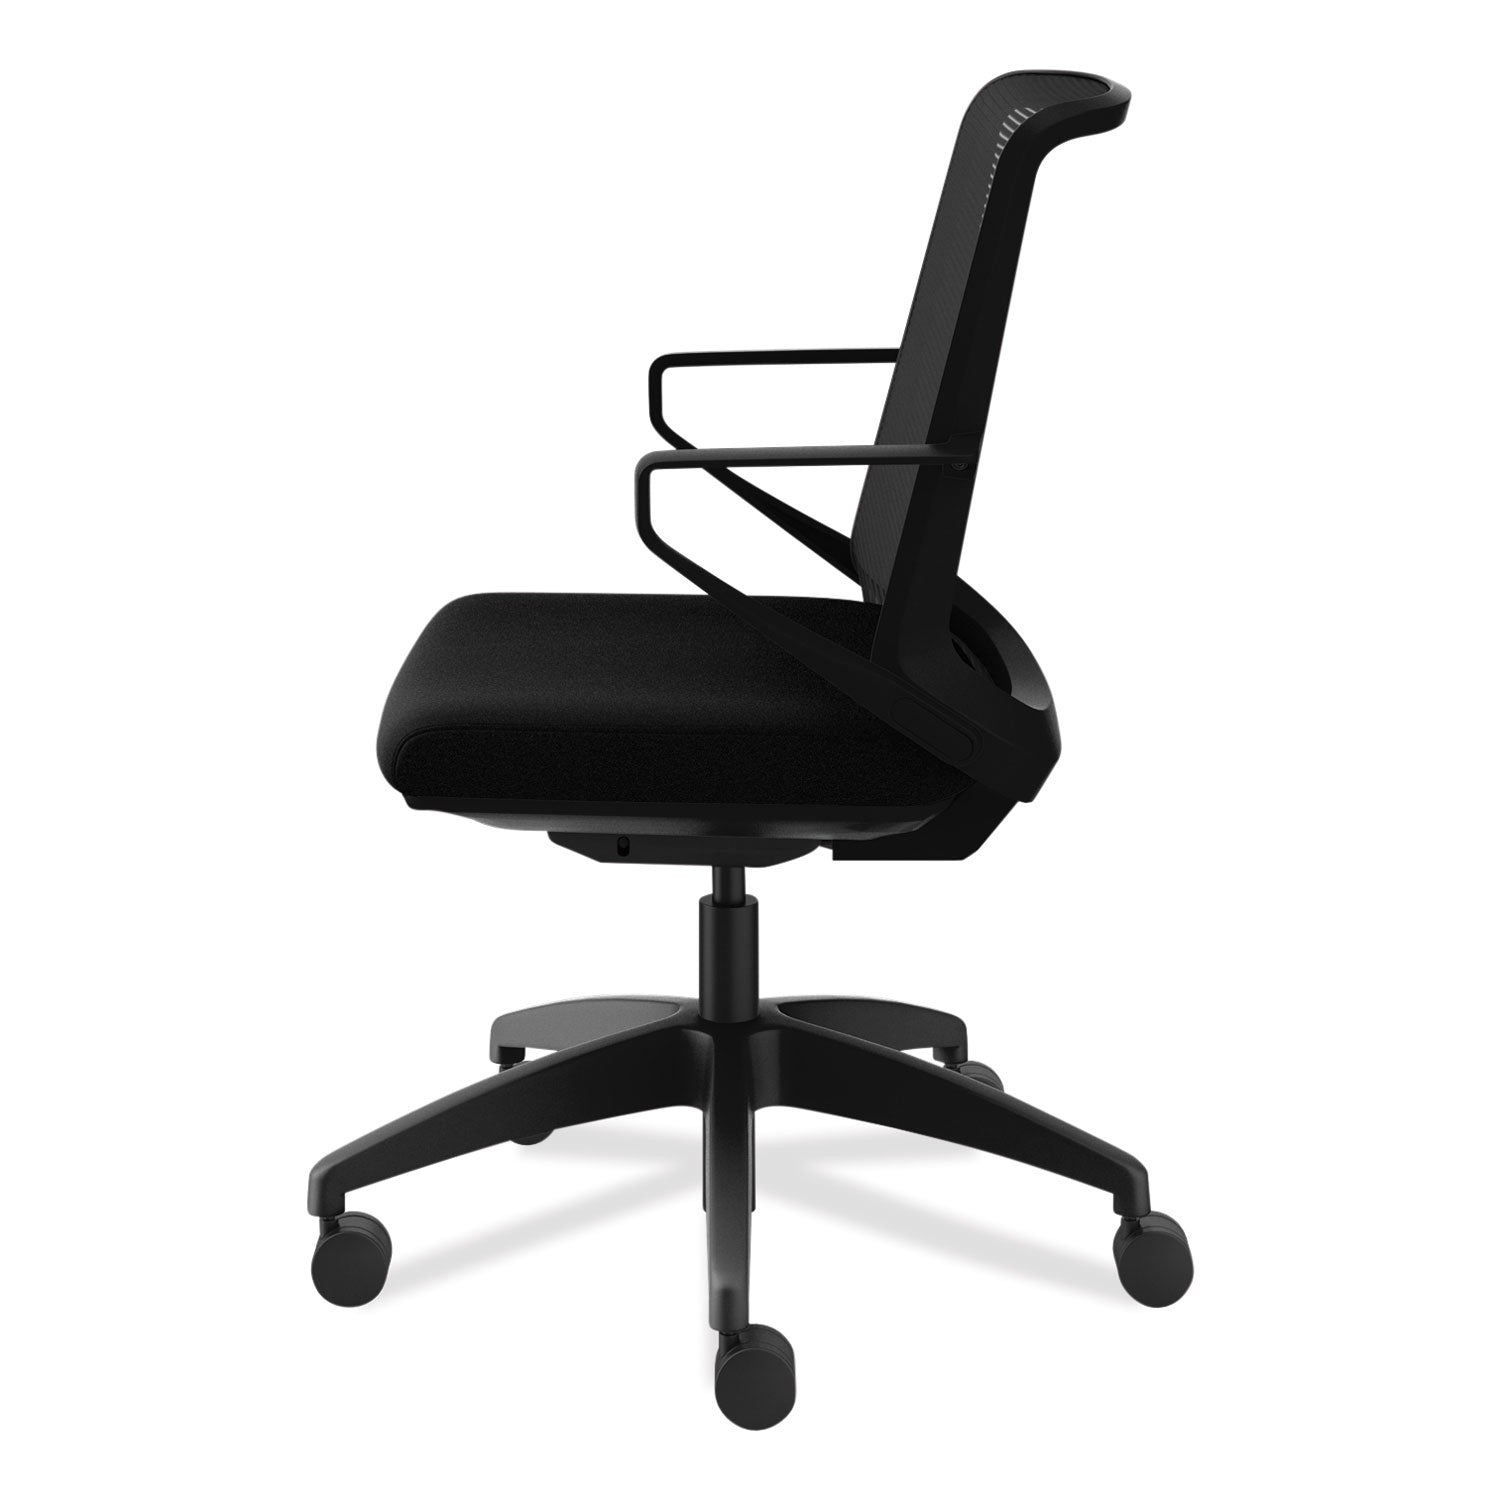 cliq-office-chair-supports-up-to-300-lb-17-to-22-seat-height-black-seat-back-black-base-ships-in-7-10-business-days_honclqimcu10t - 7